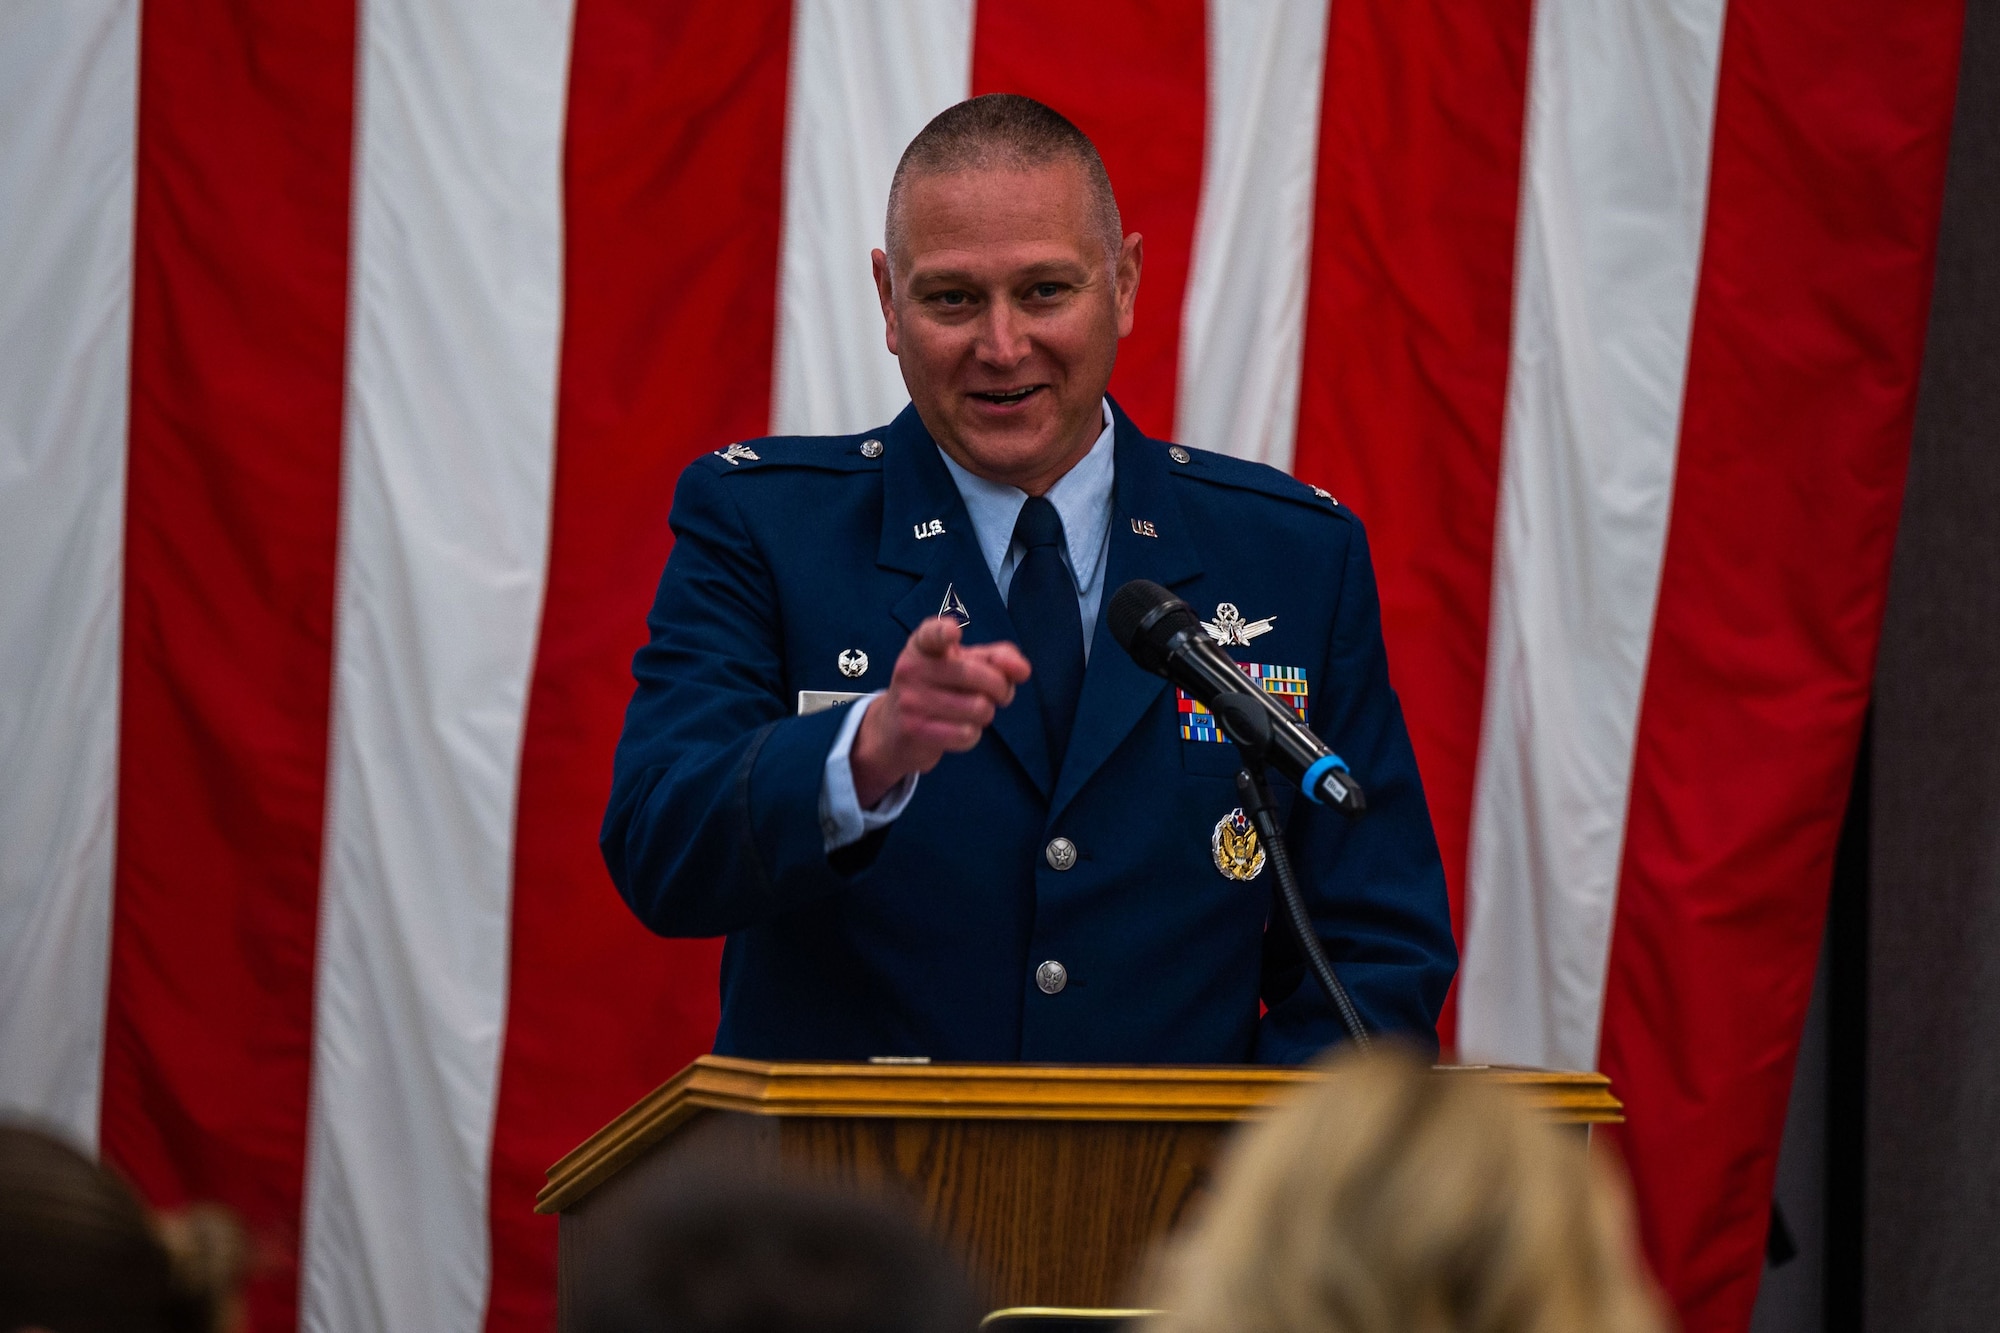 U.S. Space Force Col. Marc A. Brock, Space Delta 2 commander, speaks at the podium while acting as the presiding officer for the 18th Space Defense Squadron’s (18 SDS) change of command ceremony at Vandenberg Space Force Base, Calif., June 21, 2023. Lt. Col. Matthew J. Lintker relinquished command of the 18 SDS to Lt. Col. Jordan O.E. Mugg. (U.S. Space Force photo by Tech. Sgt. Luke Kitterman)